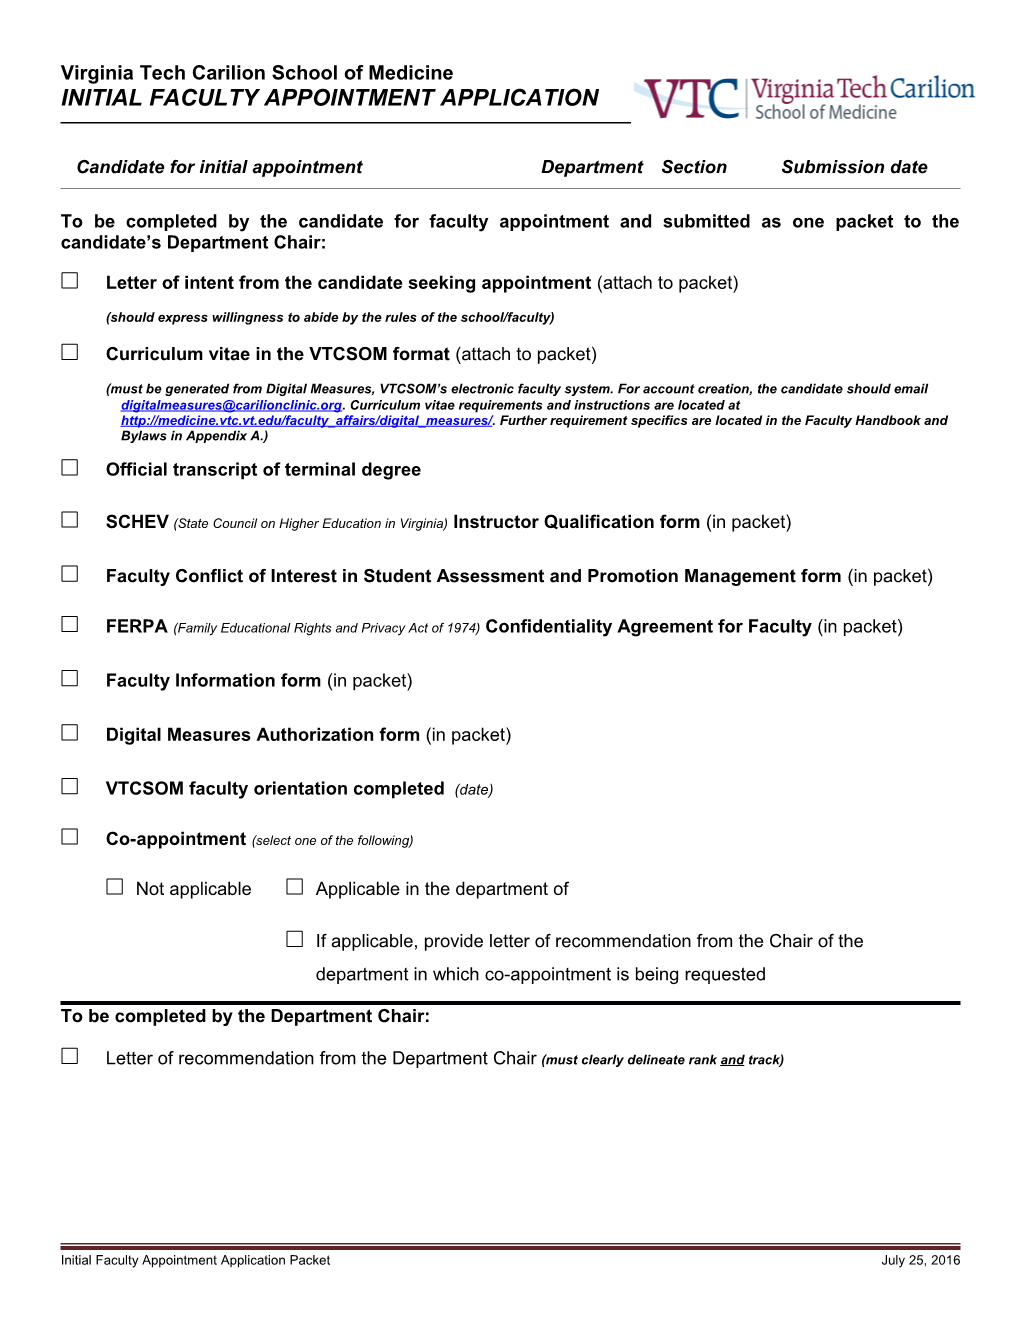 Initial Faculty Appointment Application